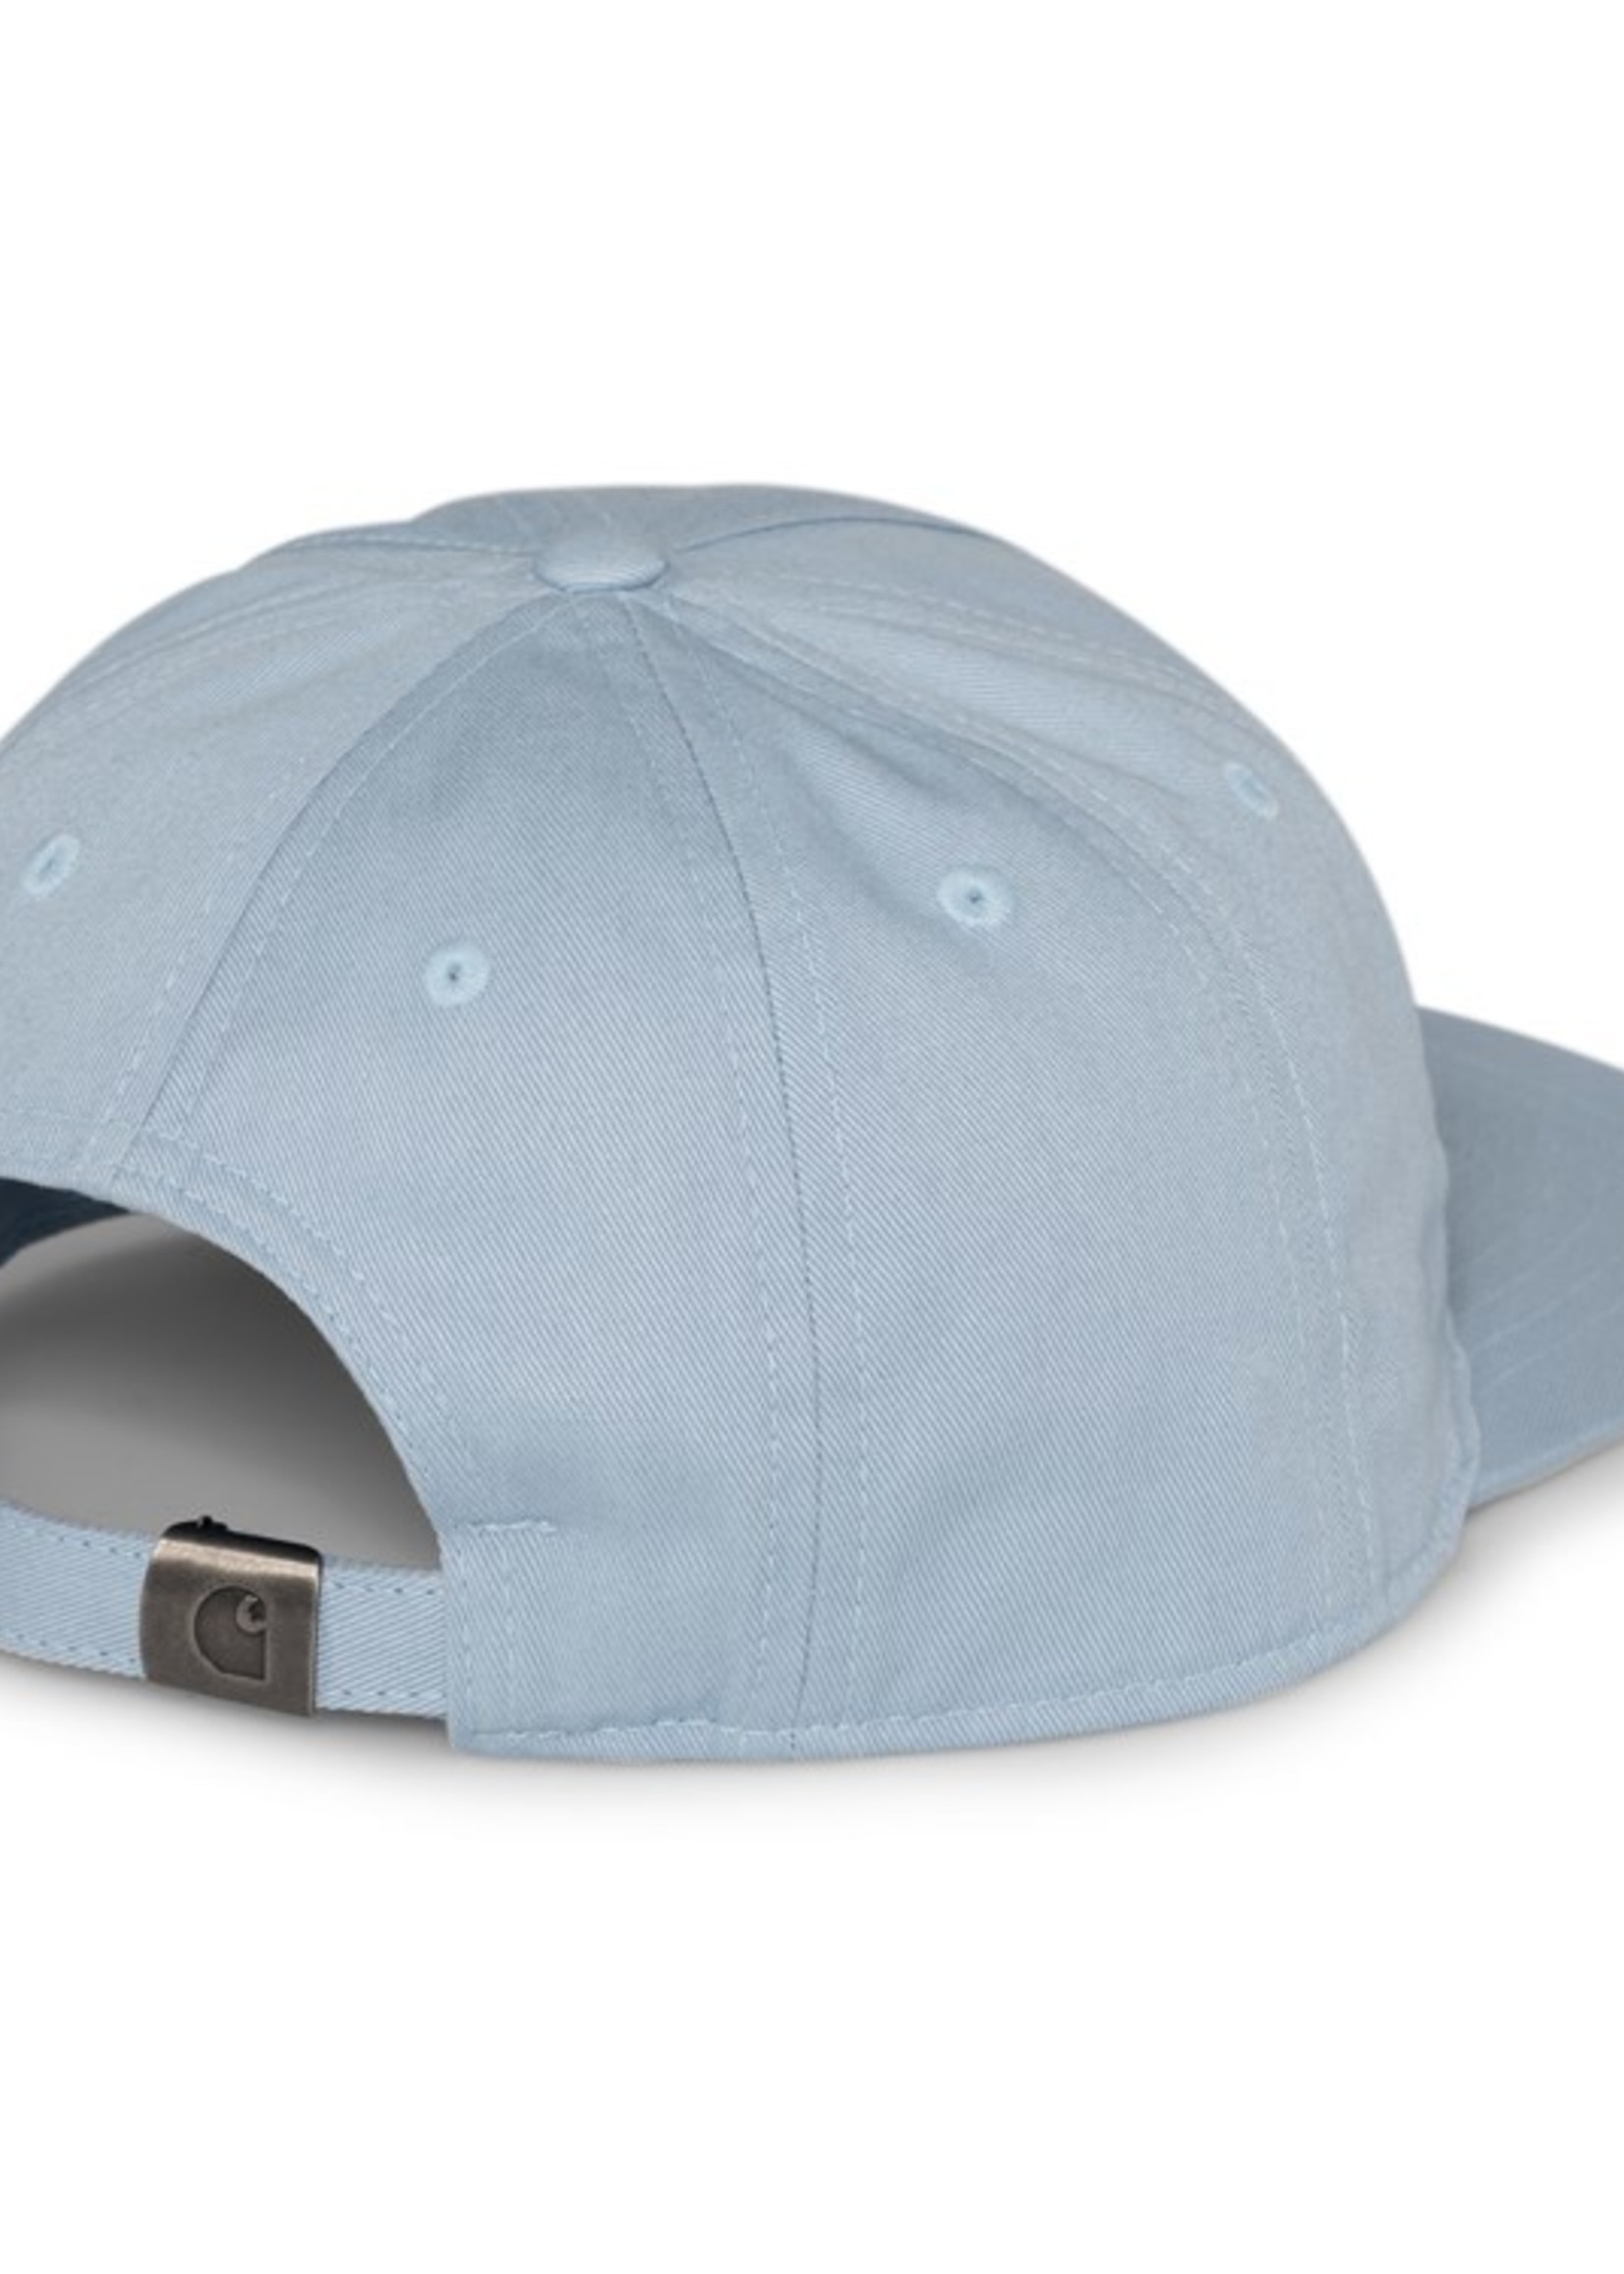 OR NEVER Baseball Duel NOW WIP Carhartt Icarus in Cap -